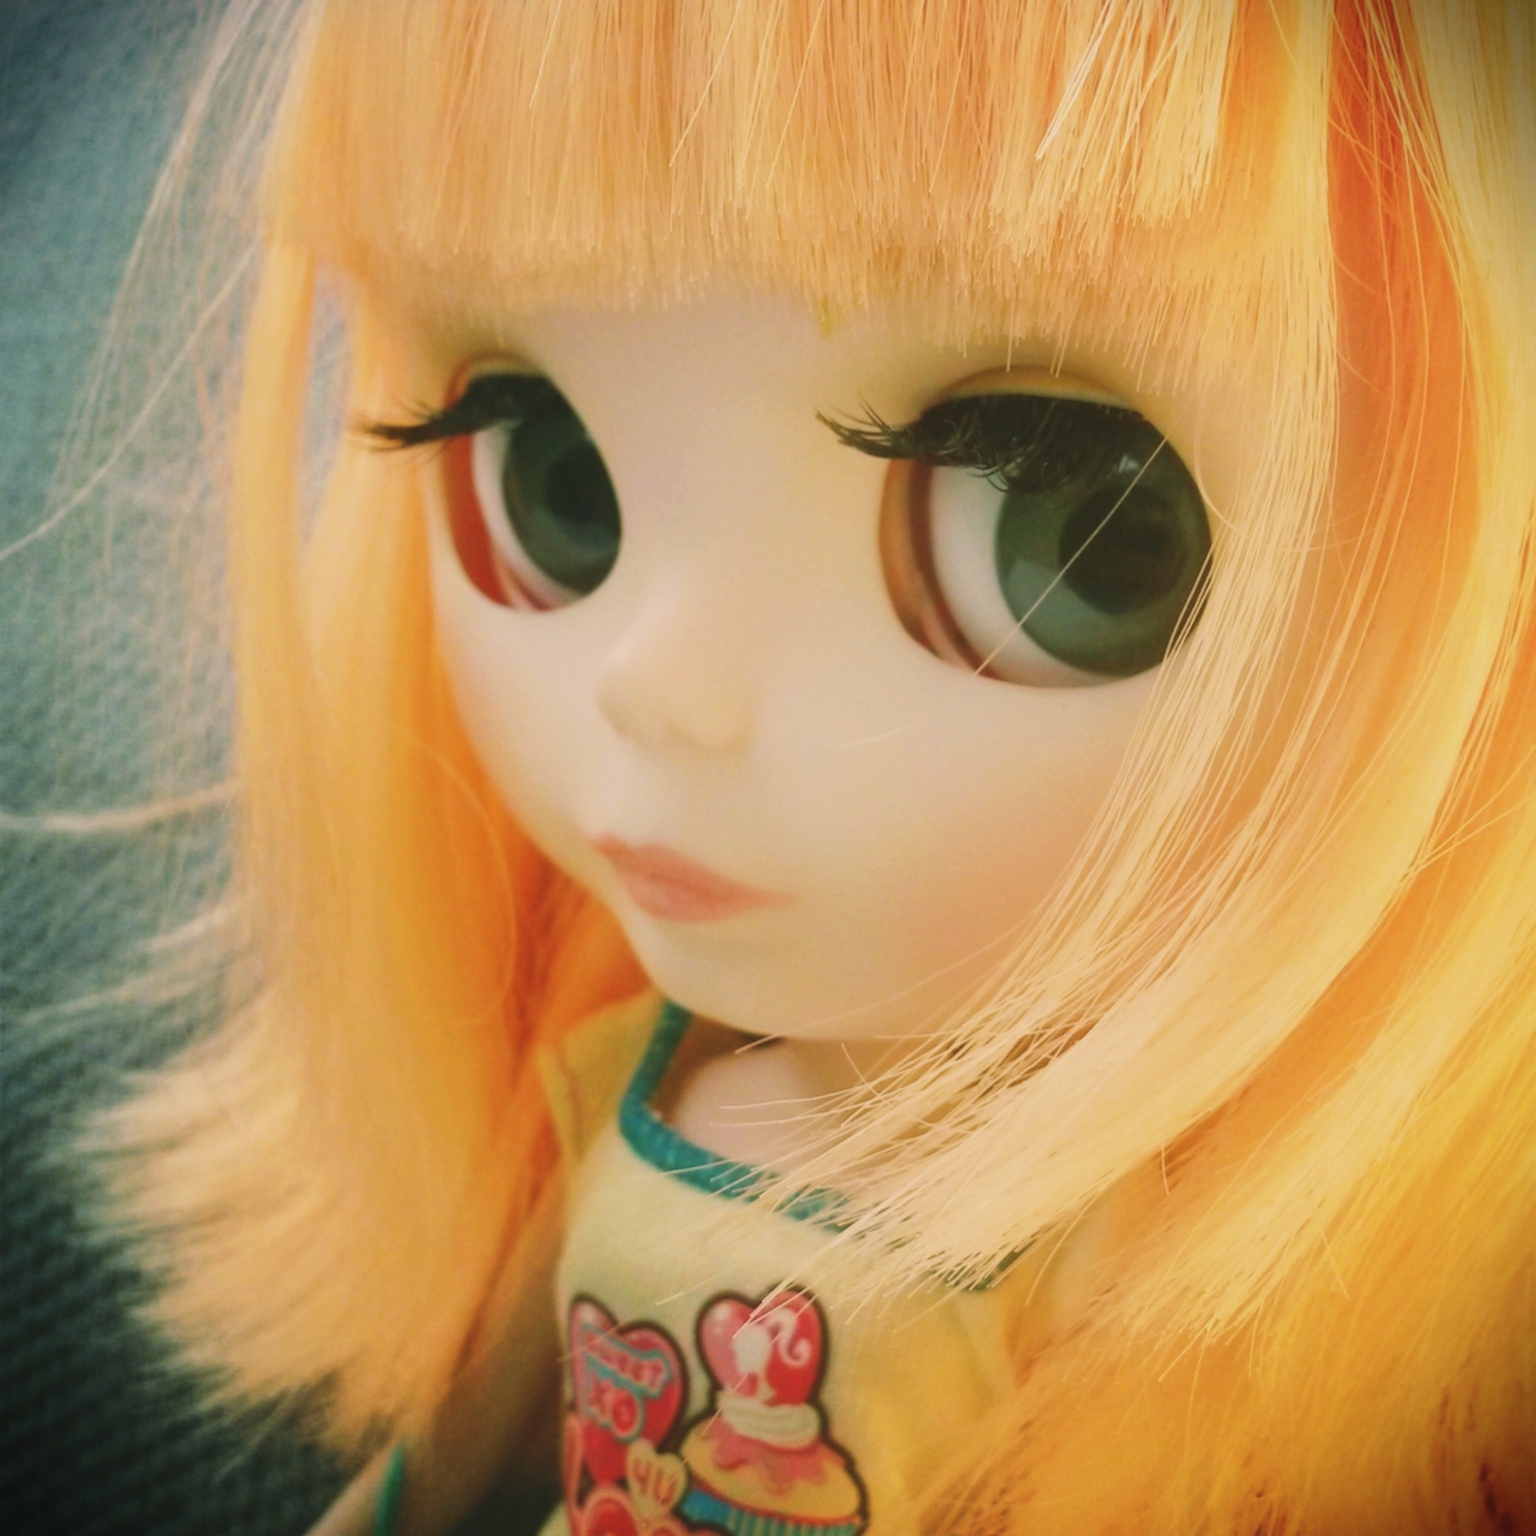 this is a doll's yellow hair and green eyes